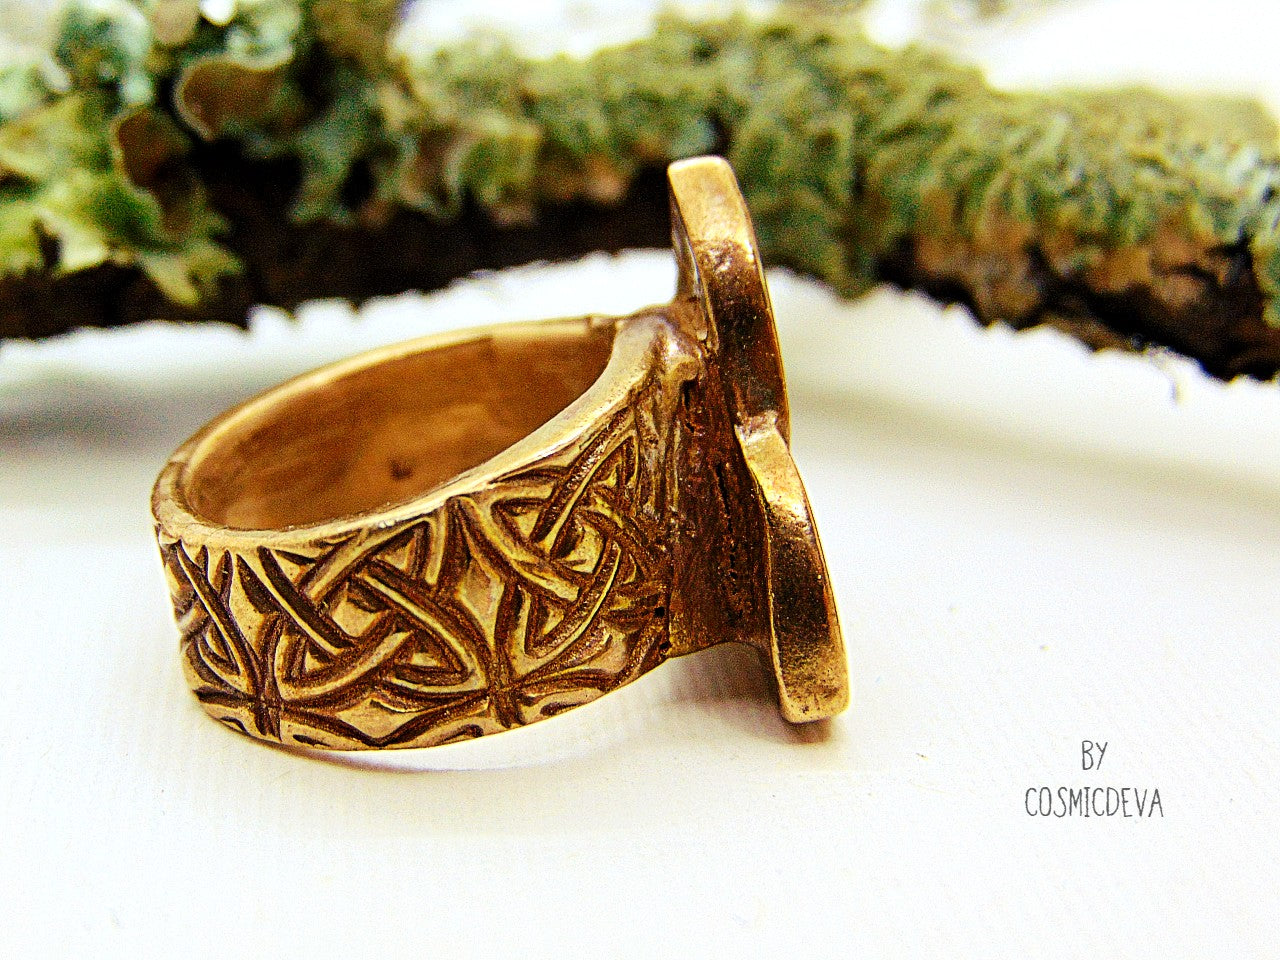 Handcrafted trinity knot ring made of solid gold bronze. The triquetra symbol was adopted by early Irish Christians in the 4th century as a symbol of the Holy Trinity